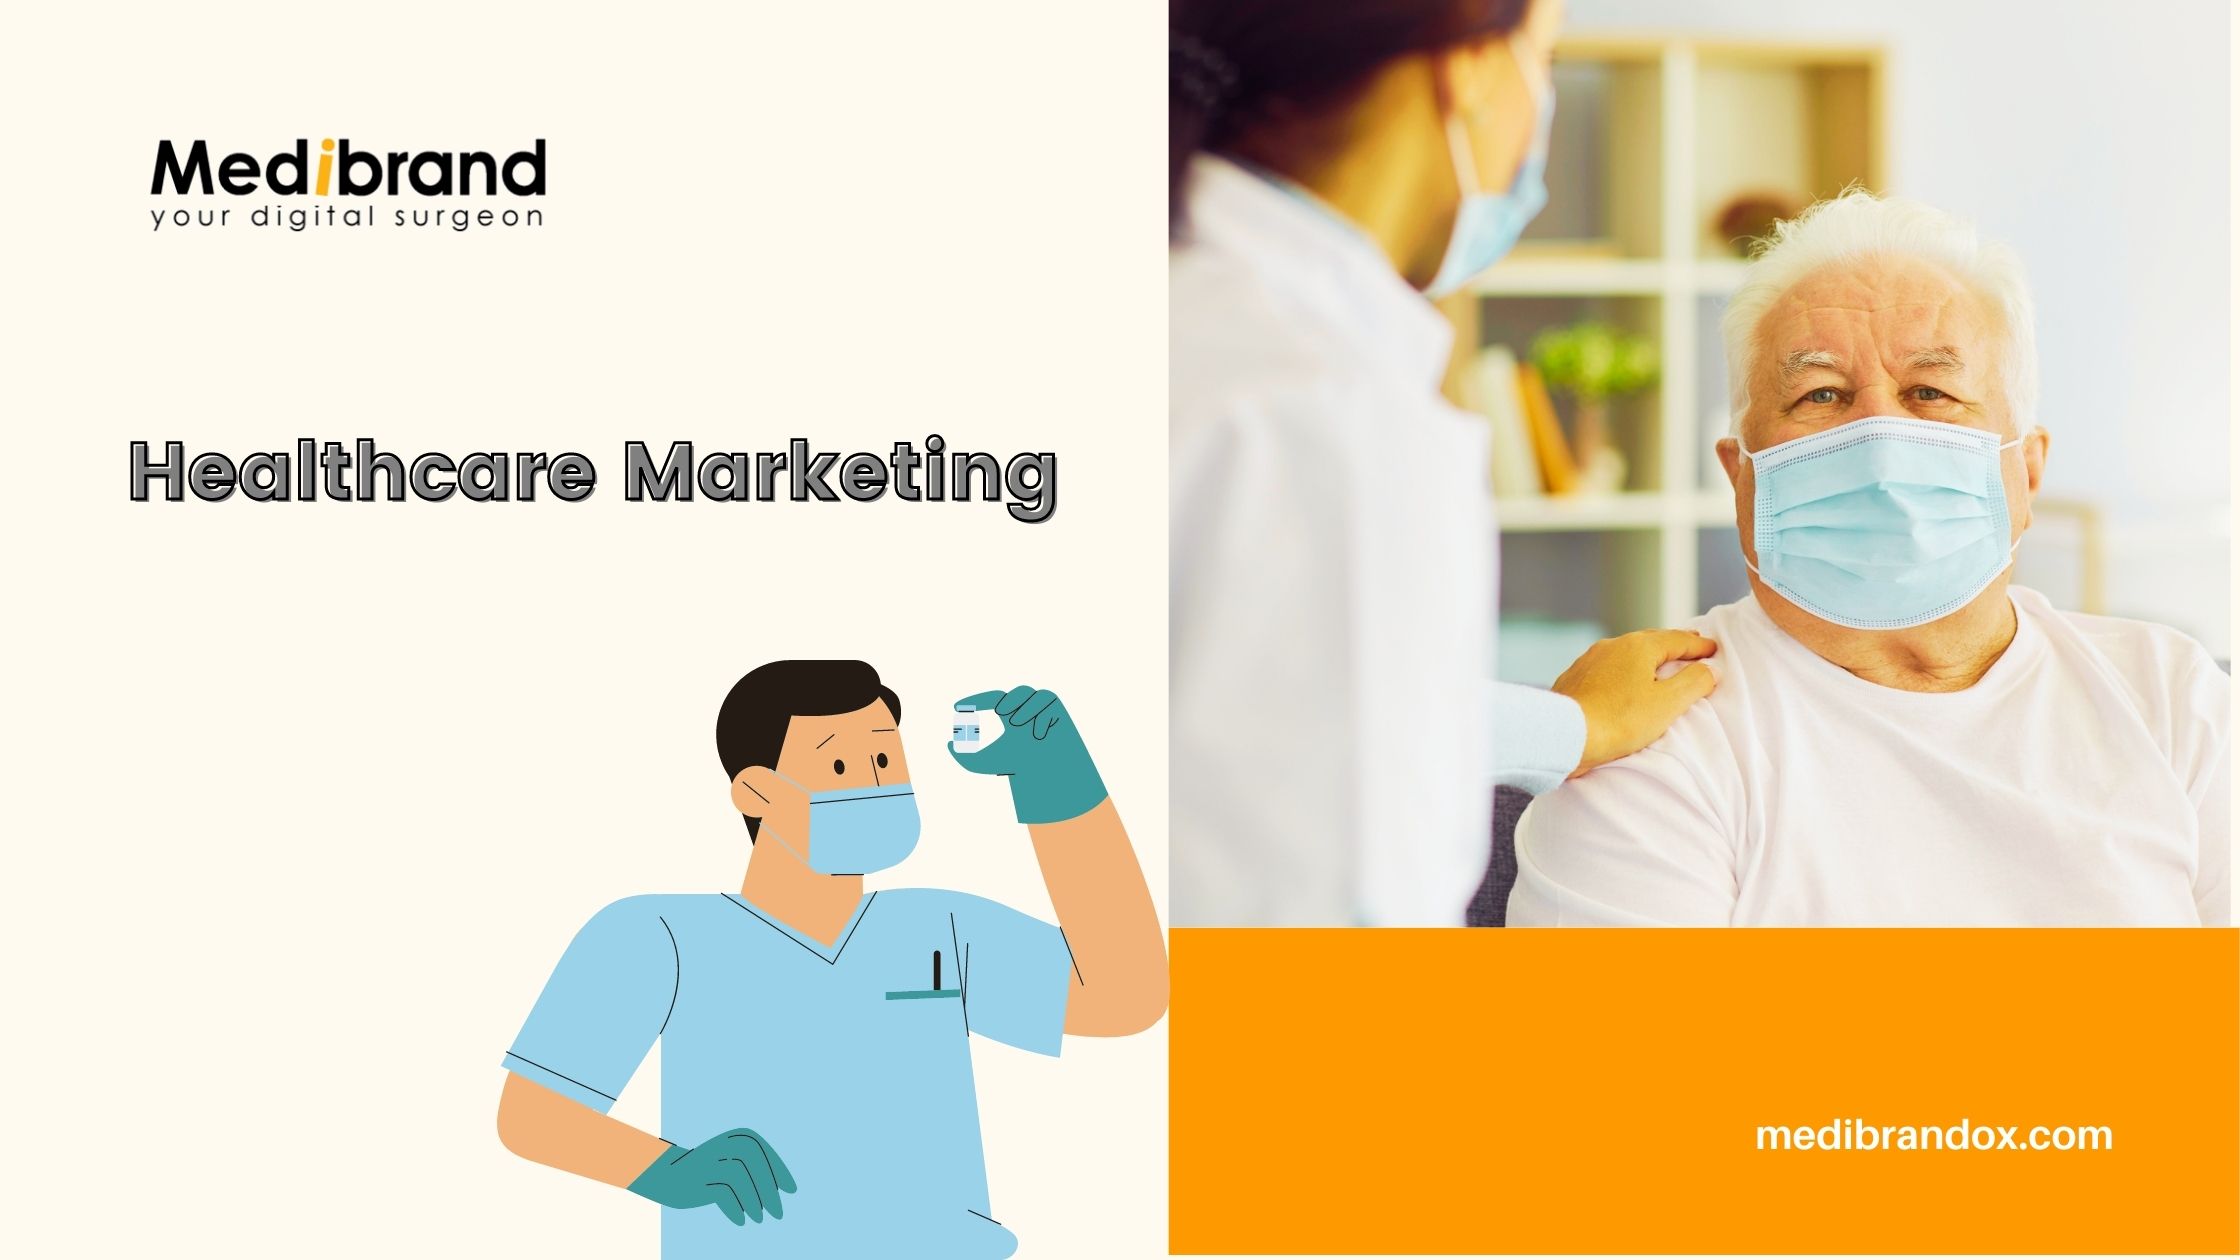 Article about Healthcare Marketing Company Helps Doctor, Hospitals, Clinics